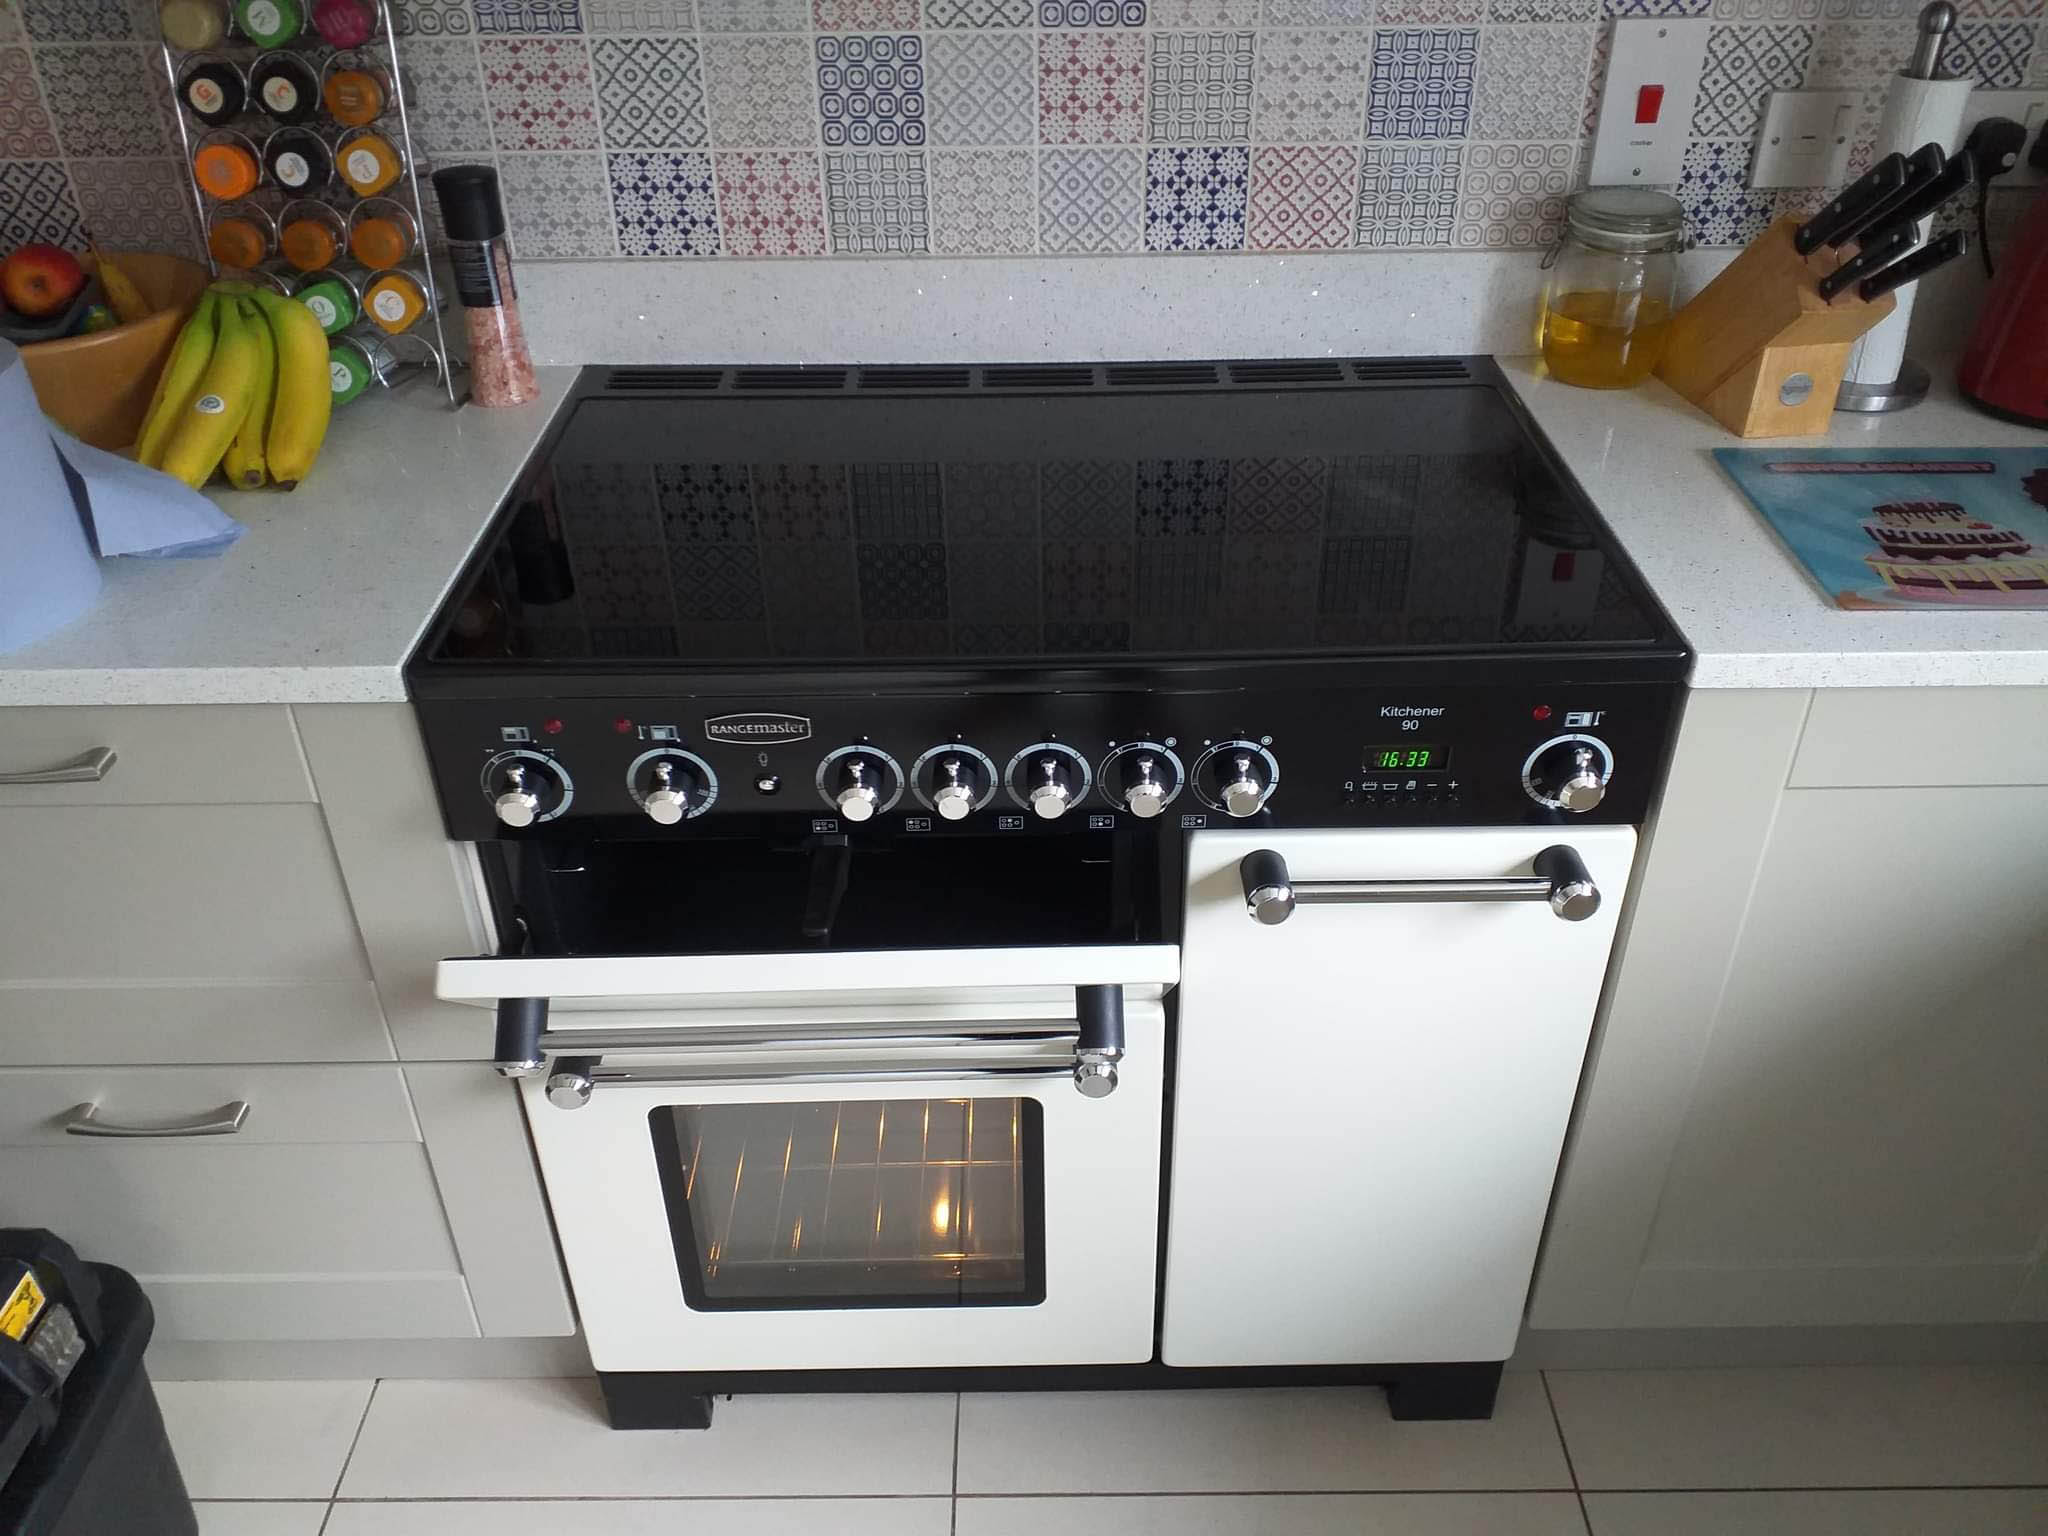 Clean hob | Clean Oven Belfast | Oven Cleaning NI | Oven Clean ni | Kitchen Cleaning NI | Oven Cleaning Belfast | Kitchen Appliance Cleaning Belfast | Oven Clean NI